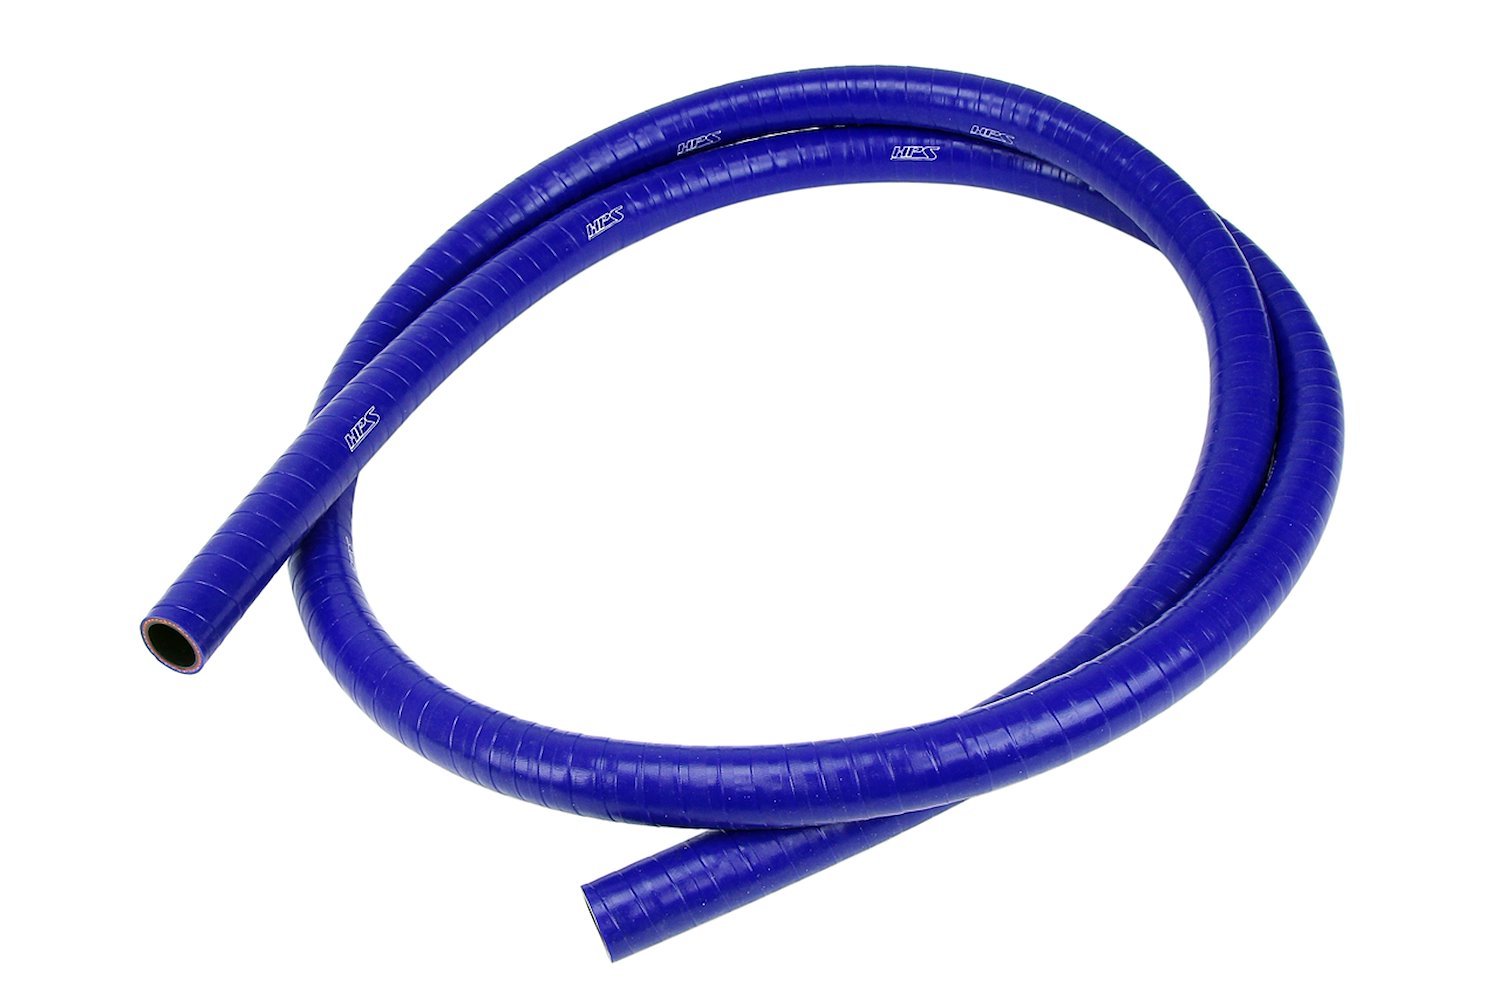 FKM-050-BLUE FKM Silicone Hose, Silicone FKM Lined Oil Resistant Hose, High-Temp 1-Ply Reinforced, 1/2 in. ID, Blue